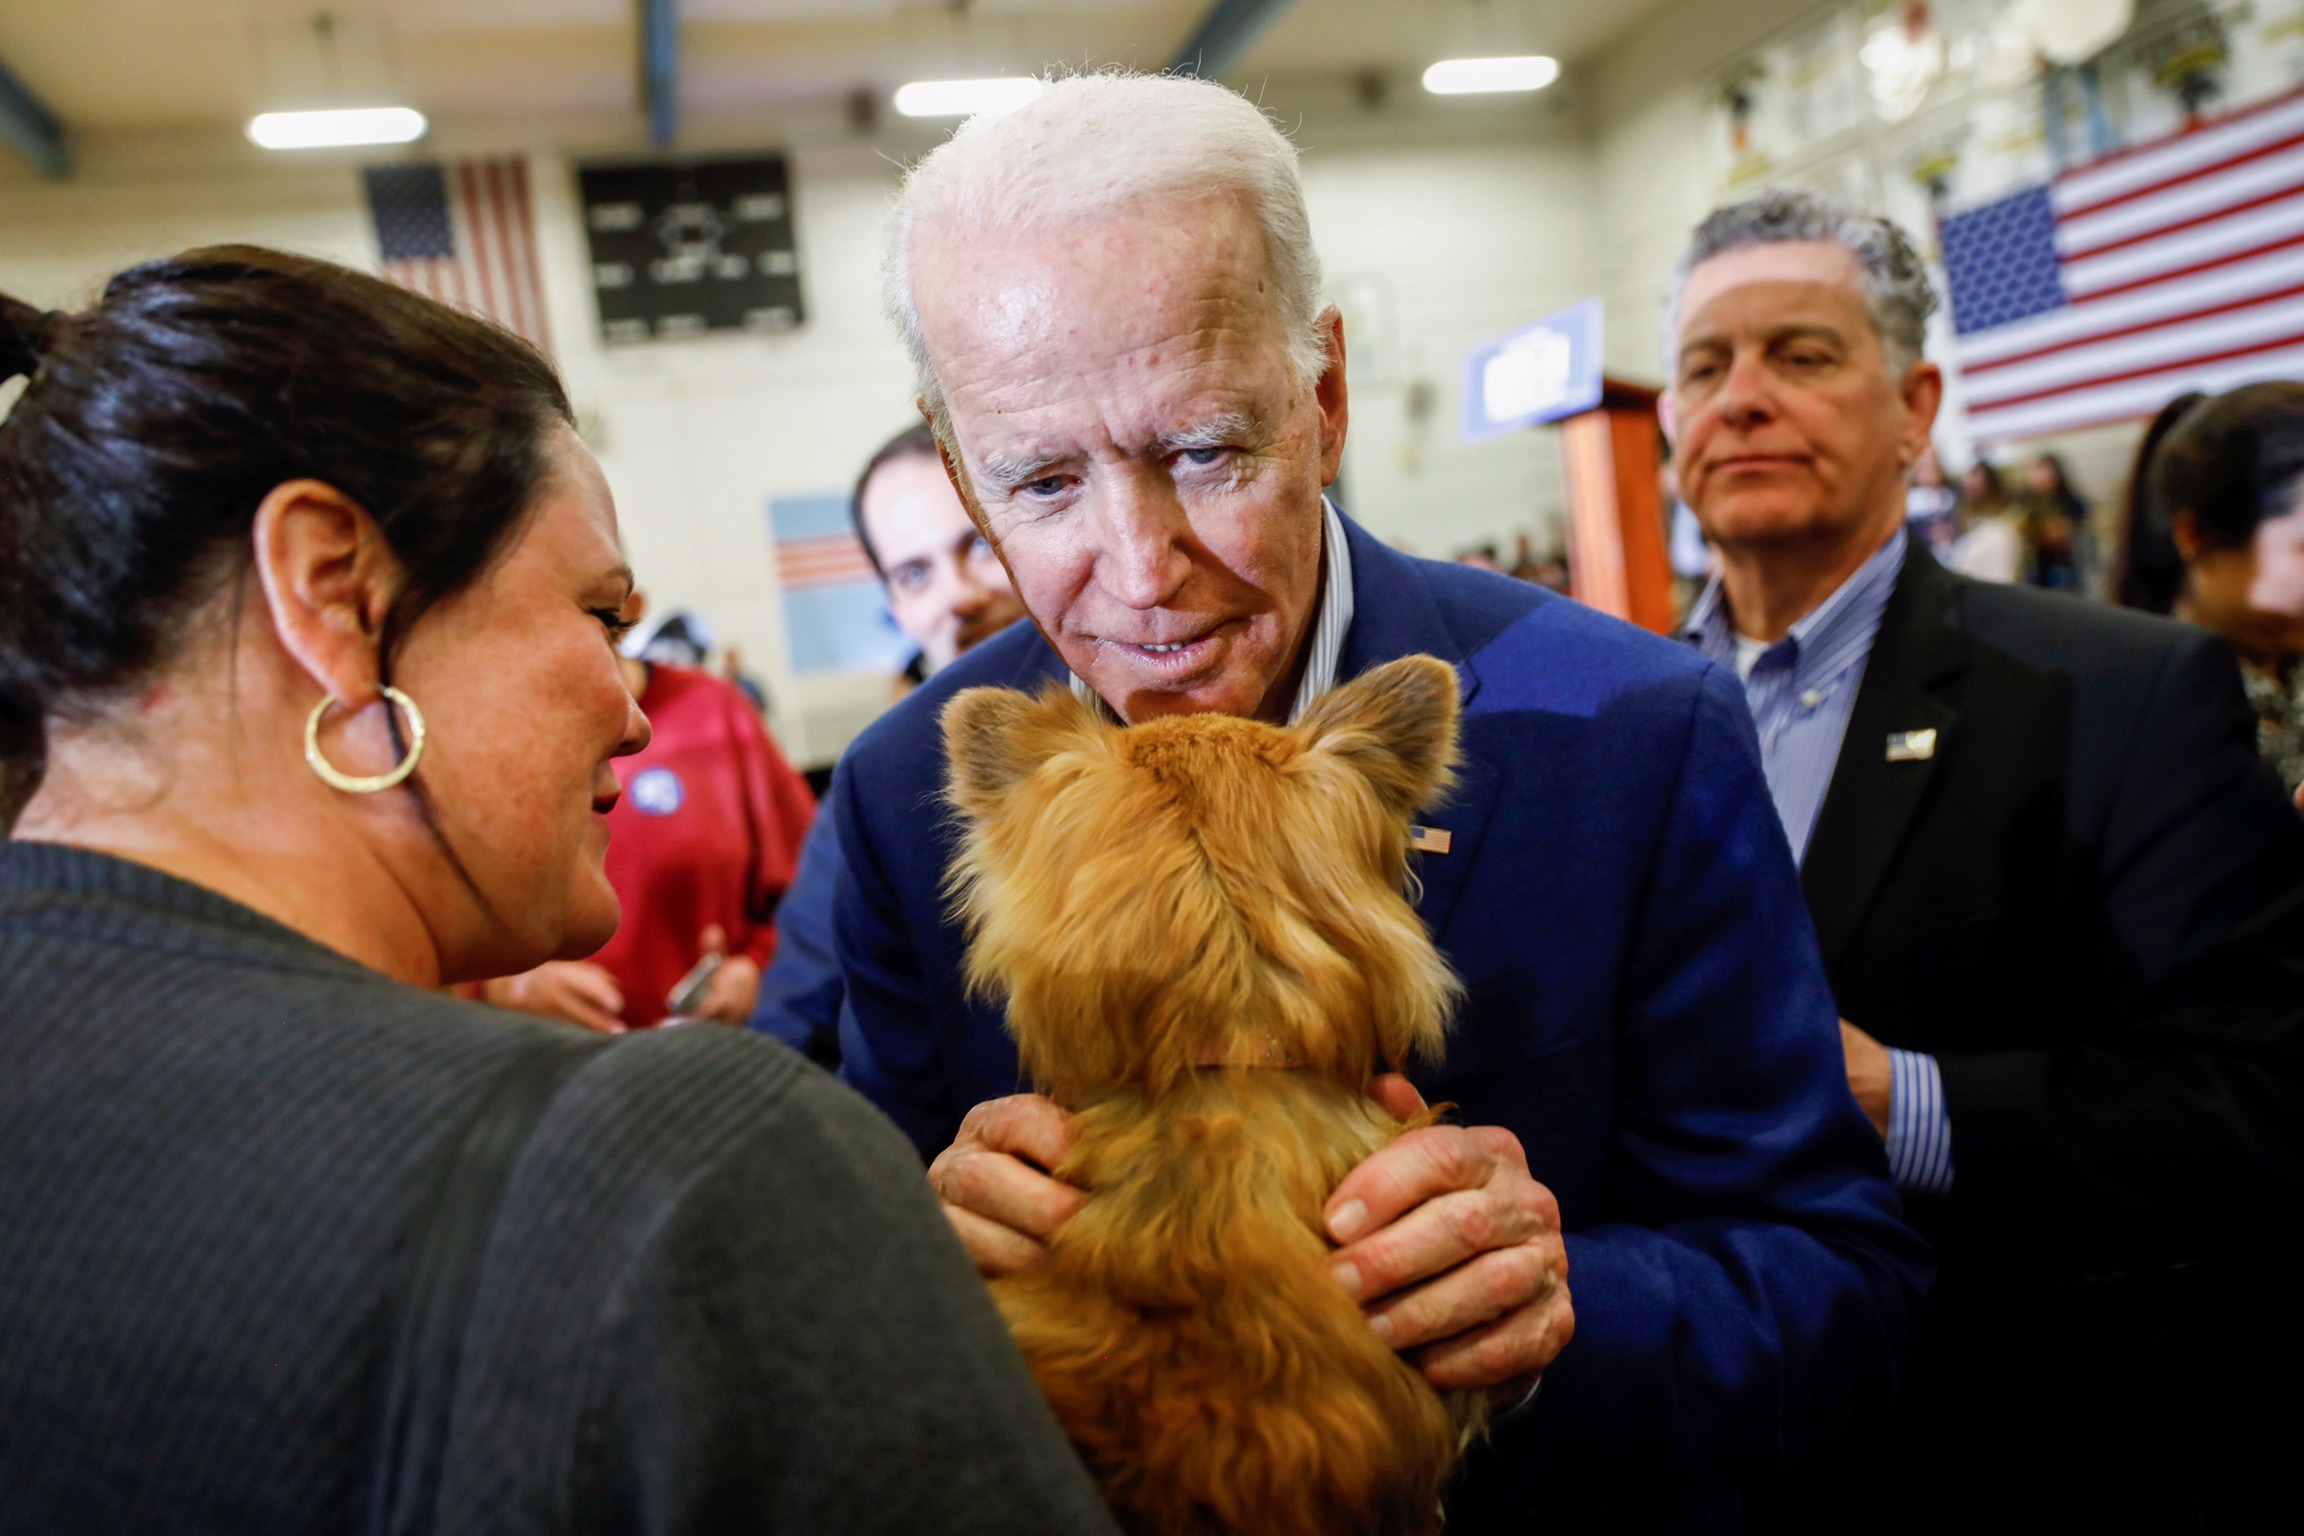 Democratic 2020 U.S. presidential candidate and former Vice President Joe Biden embraces a dog as he campaigns on the eve of the Nevada Caucus at Hyde Park Middle School in Las Vegas, Nevada Feb. 21, 2020. REUTERS/Patrick T. Fallon 